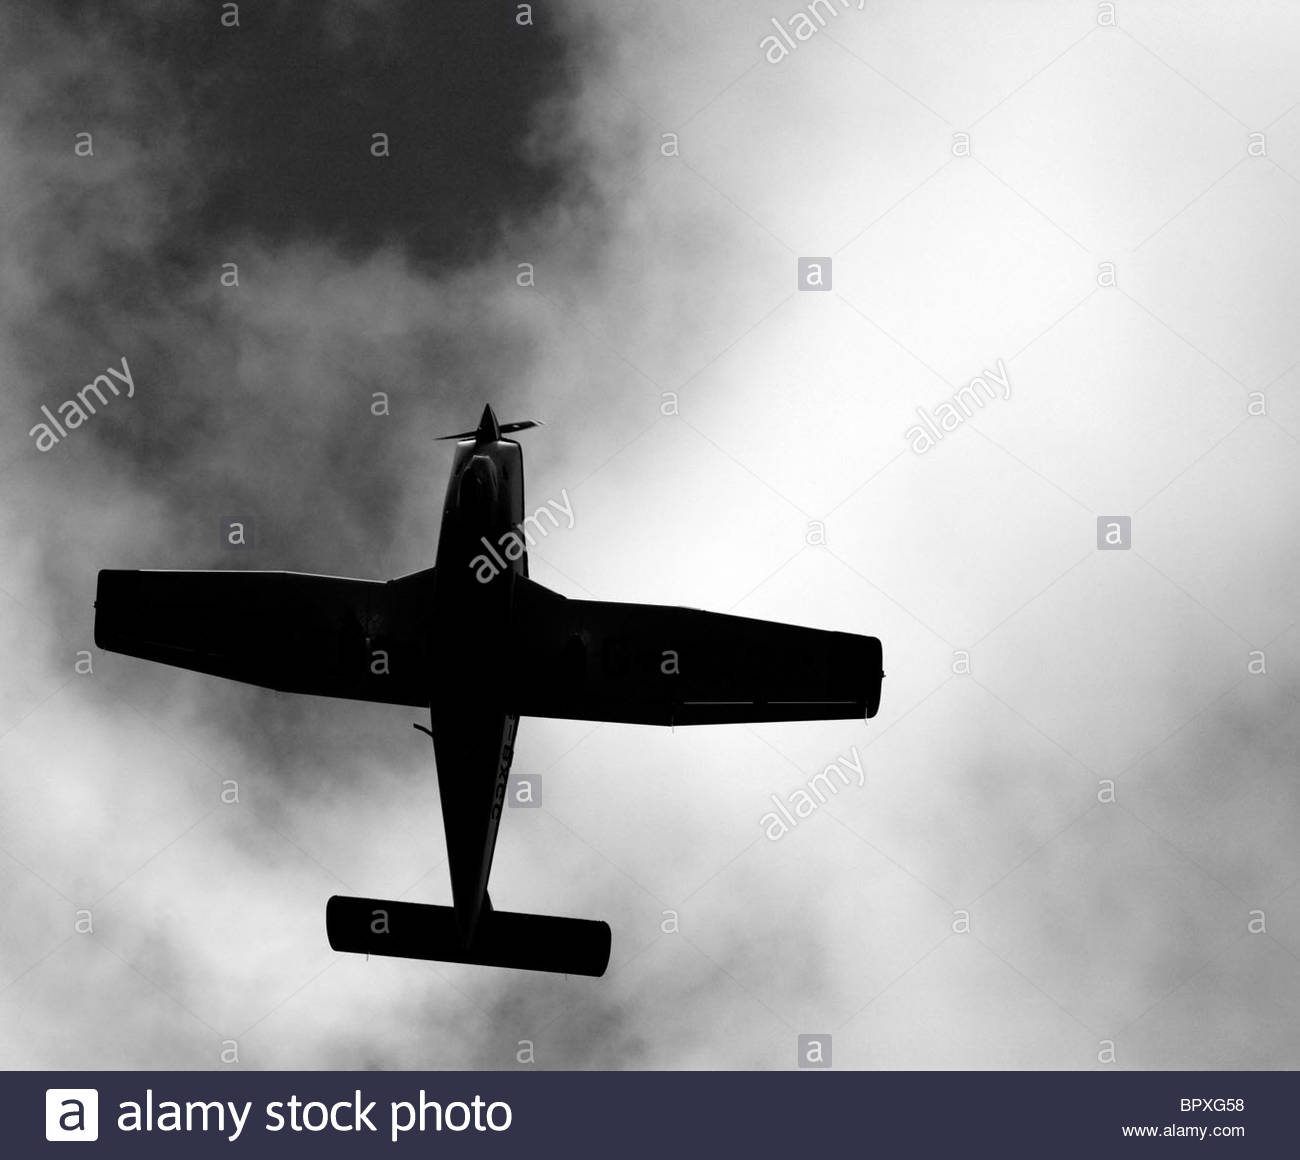 Silhouetted propeller plane against cloudy sky Stock Photo